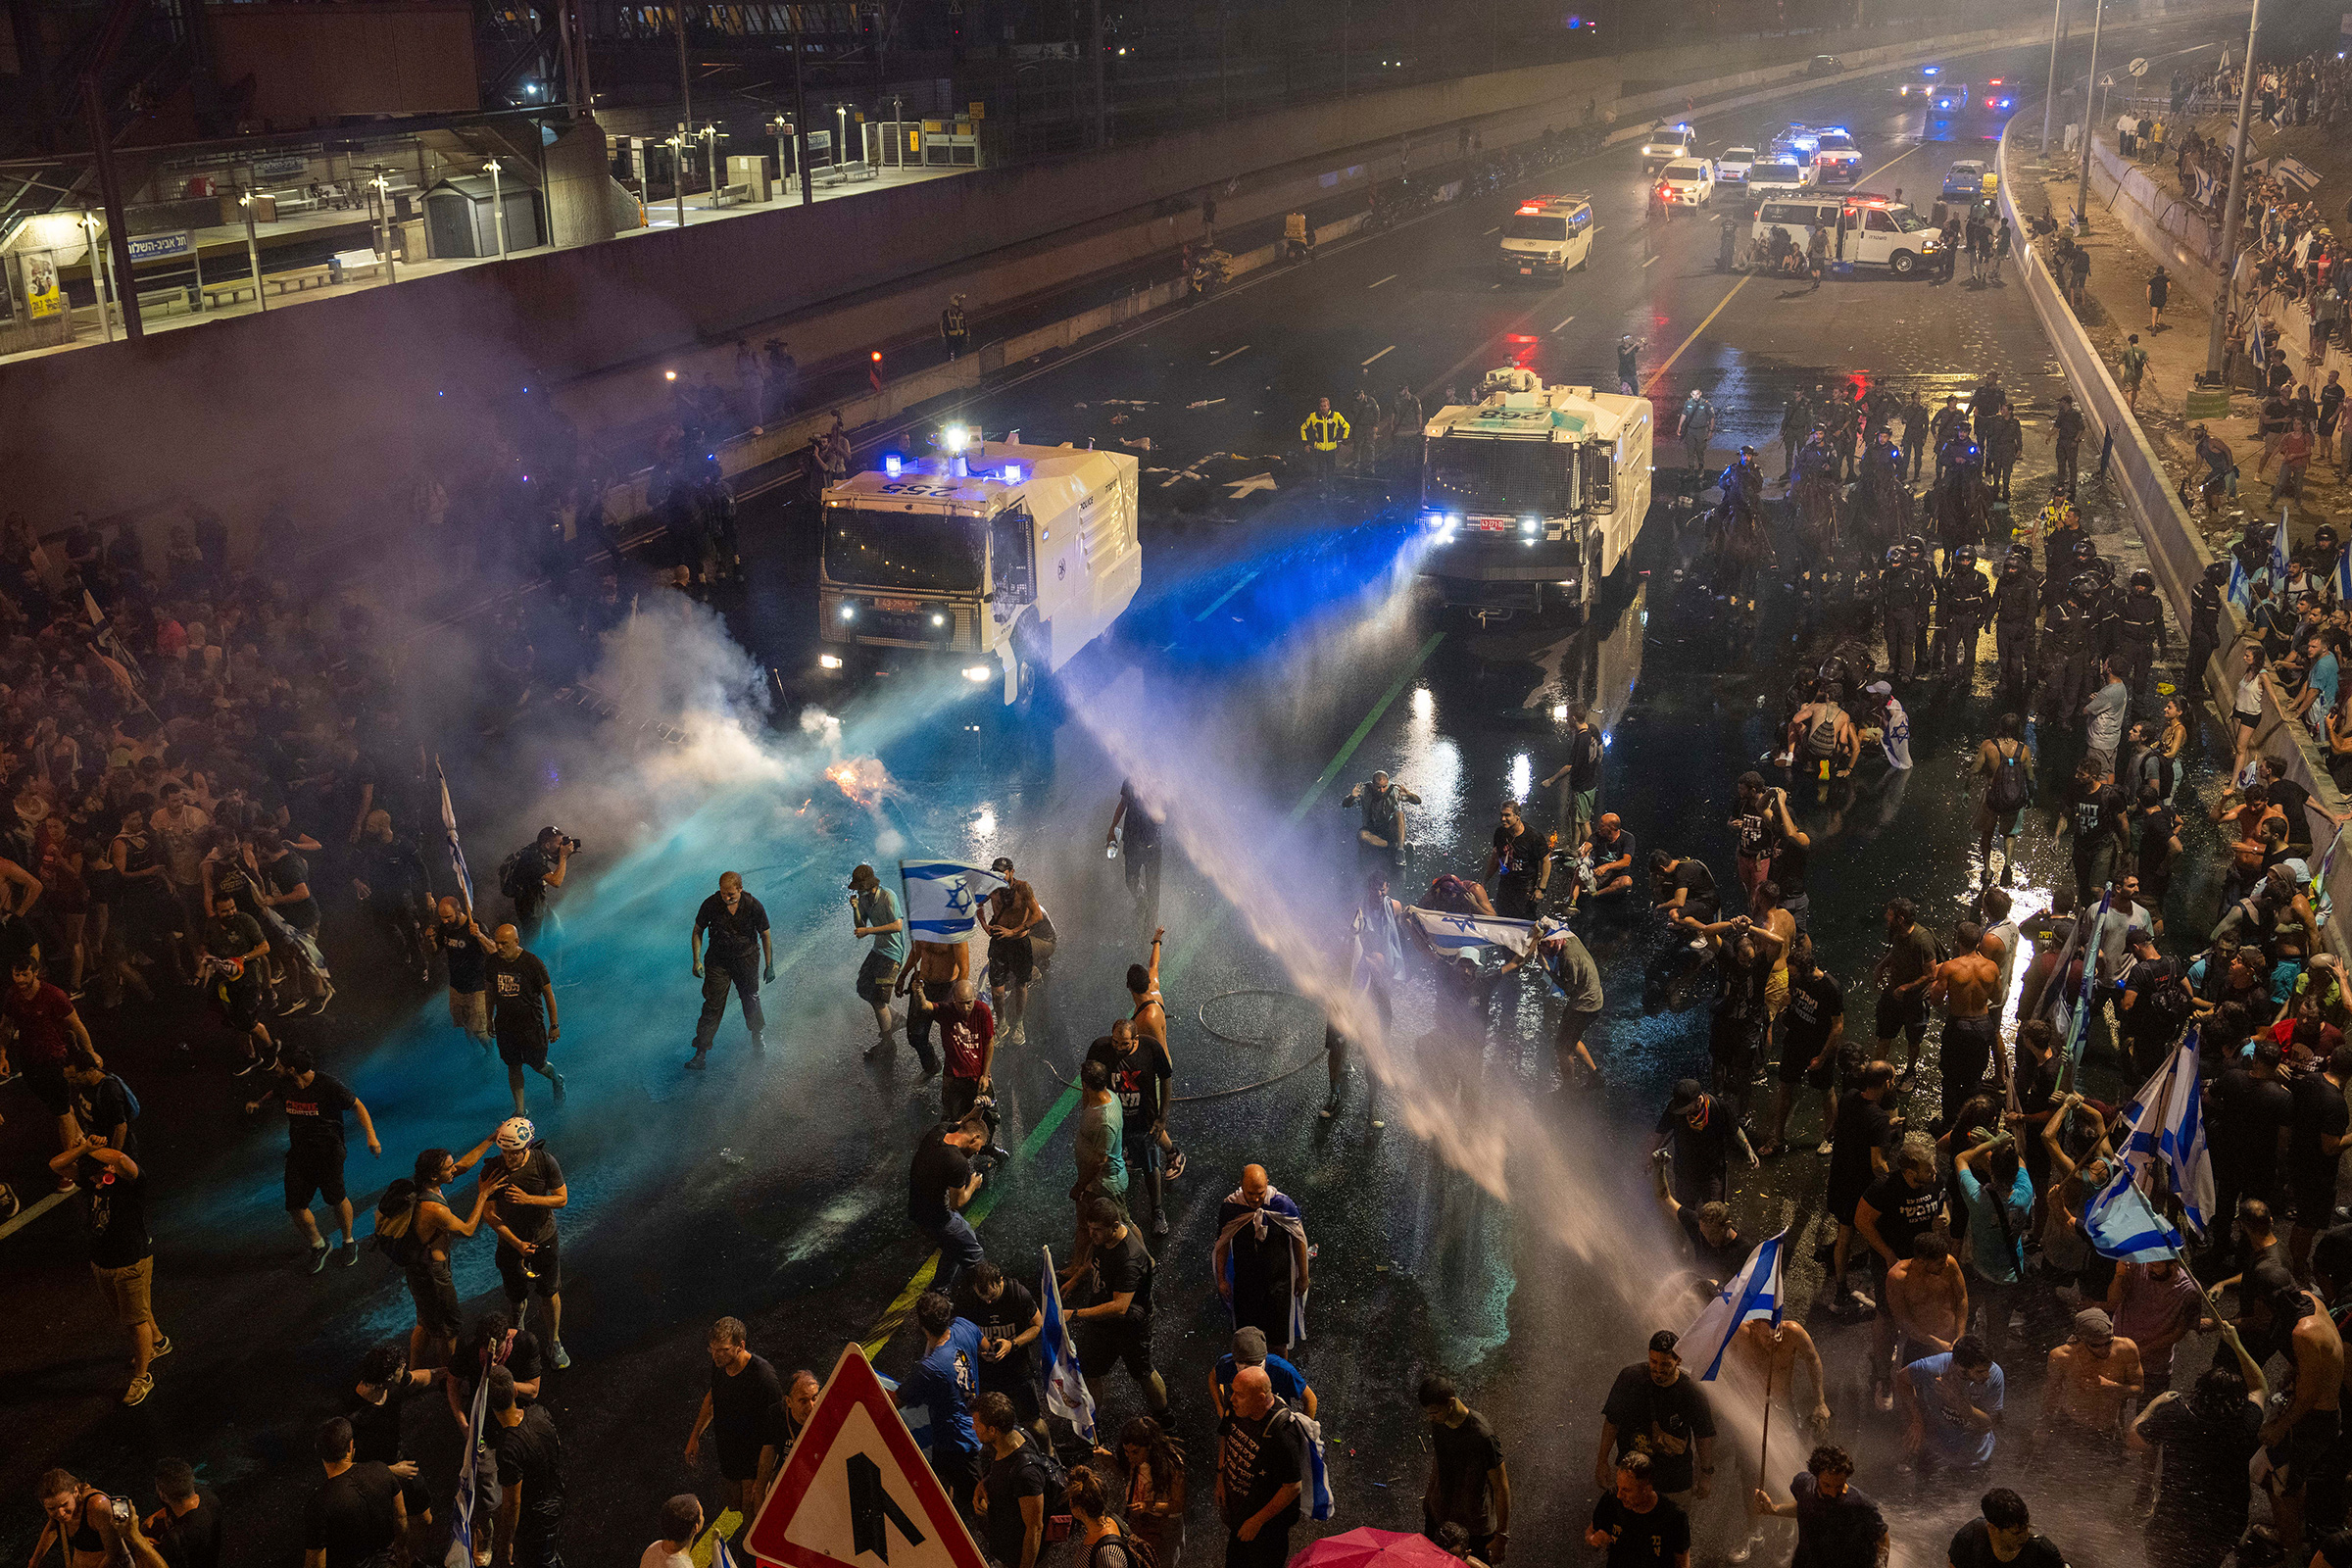 Riot police tries to clear demonstrators with a water canon during a protest against plans by Netanyahu's government to overhaul the judicial system, in Tel Aviv on July 24. Israeli lawmakers on Monday approved a key portion of Prime Minister Benjamin Netanyahu's divisive plan to reshape the country's justice system despite massive protests that have exposed unprecedented fissures in Israeli society.